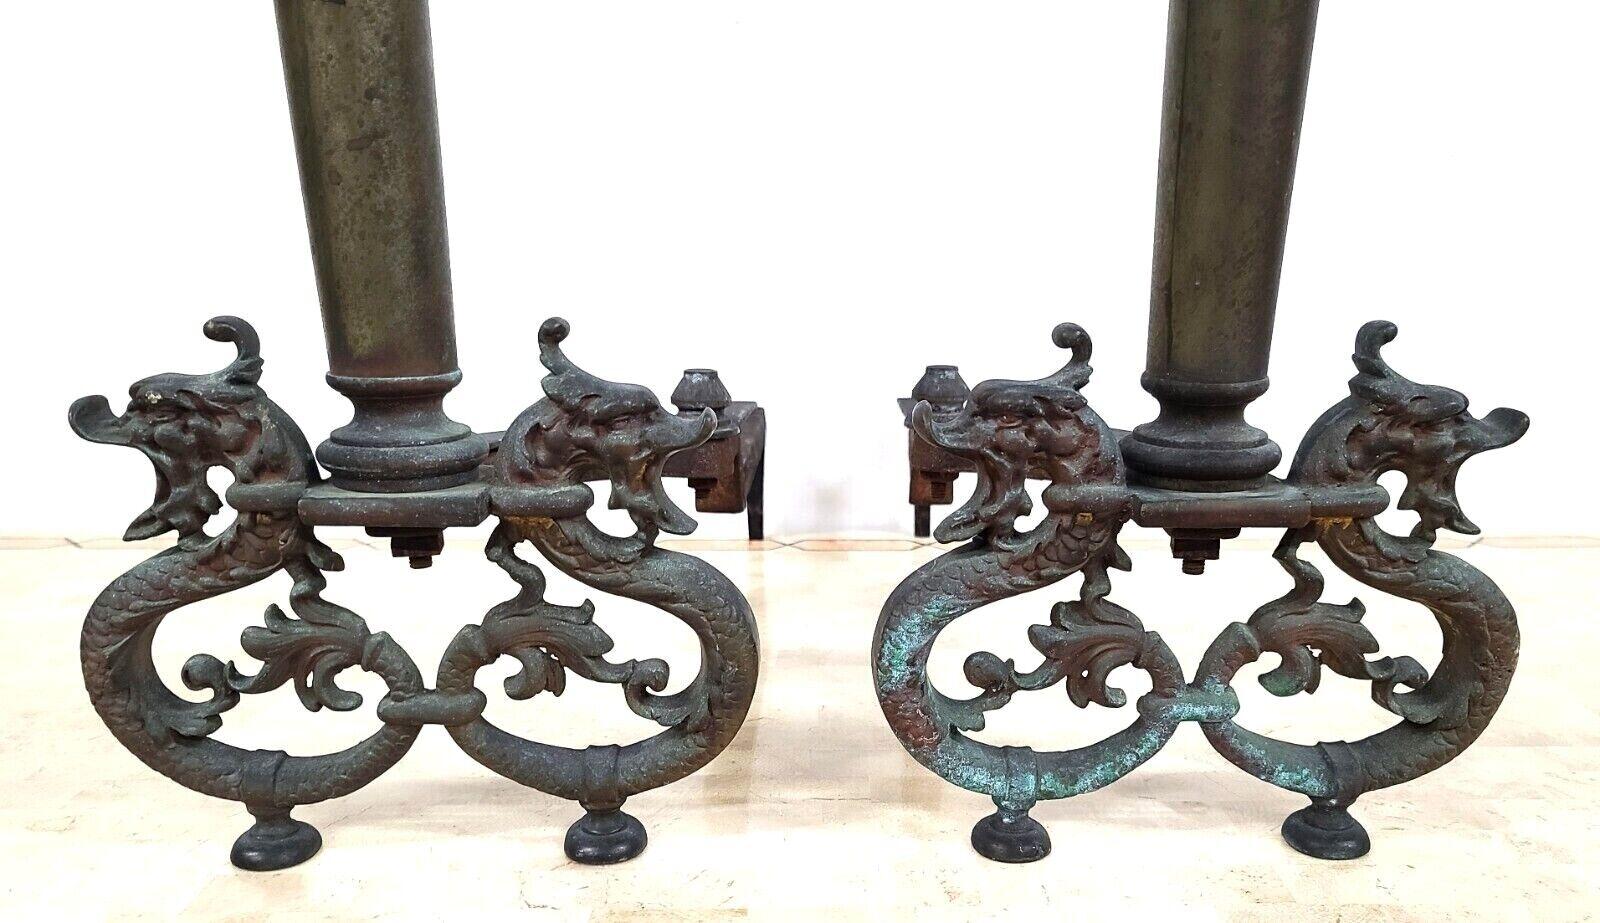 For FULL item description be sure to click on CONTINUE READING at the bottom of this listing.

Offering one of our recent Palm beach estate fine furniture acquisitions of a
pair of antique iron & brass dragons fireplace andirons.

Approximate